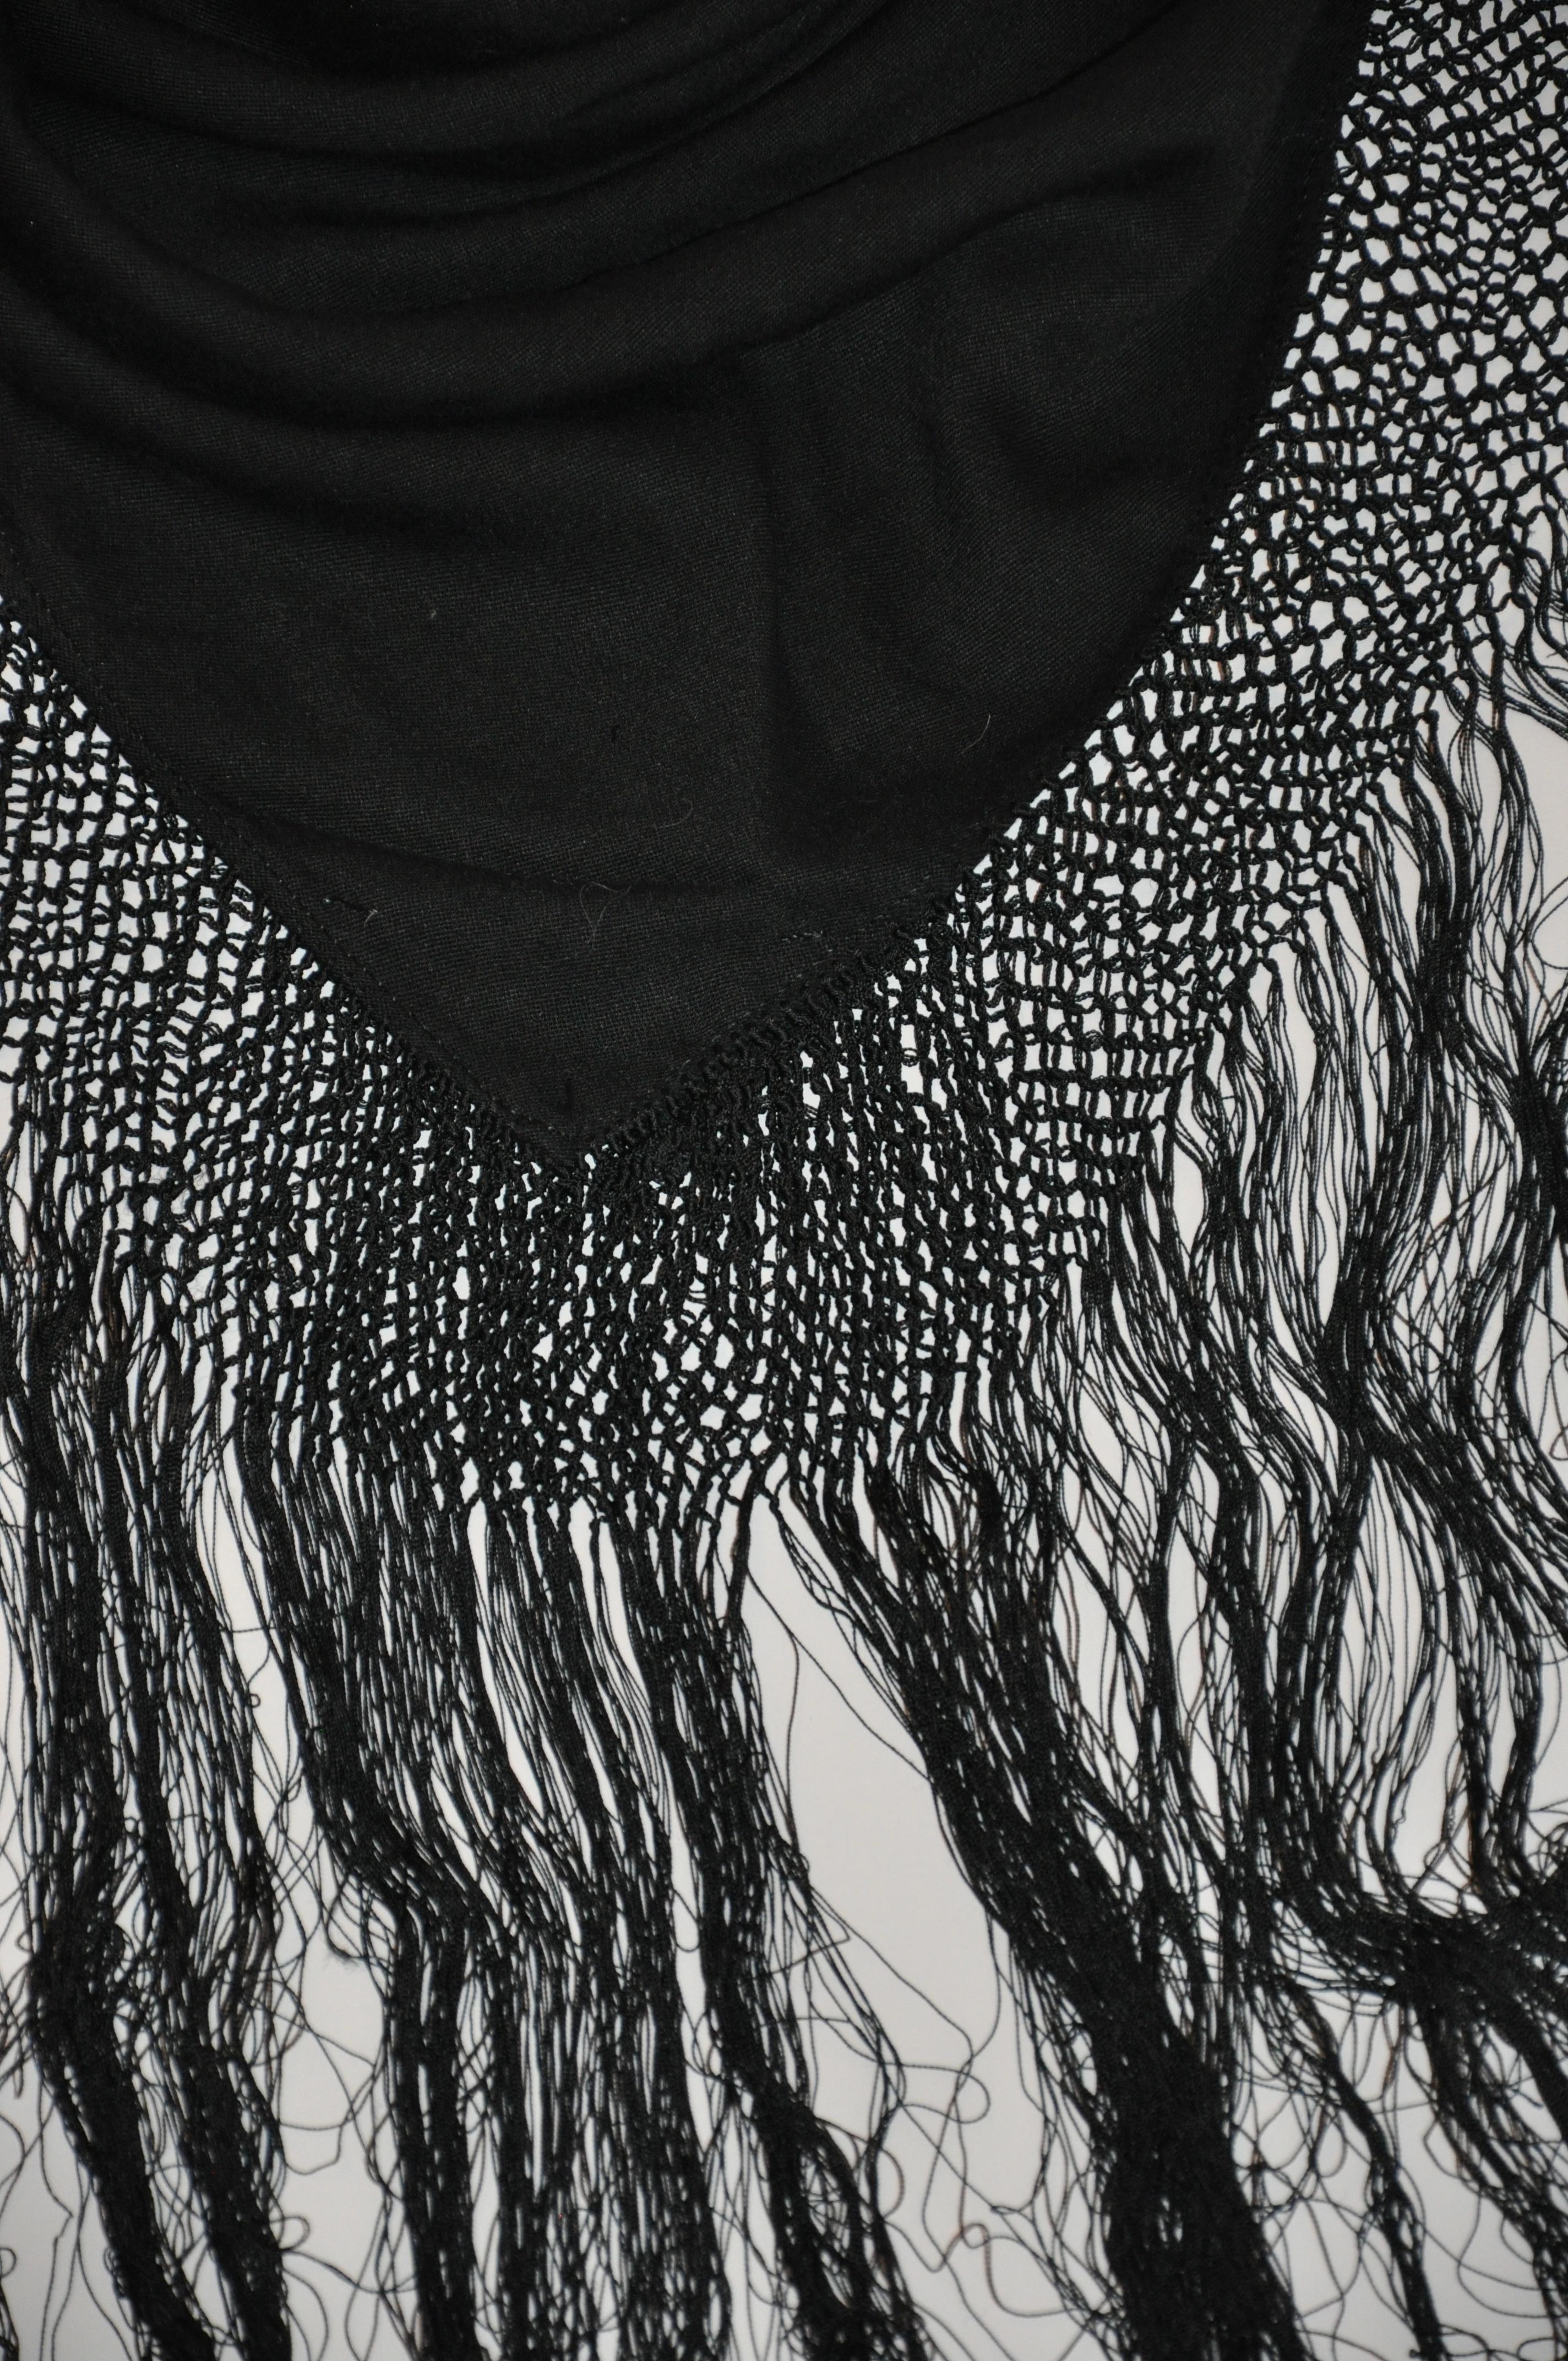        This wonderfully and dramatic huge black wool scarf and optional shawl is detailed with multi-tier hand-knotted silk cord surrounding all four sides along the border. The hand-knotted multi-tier measures 2 1/4 inches in length and finished